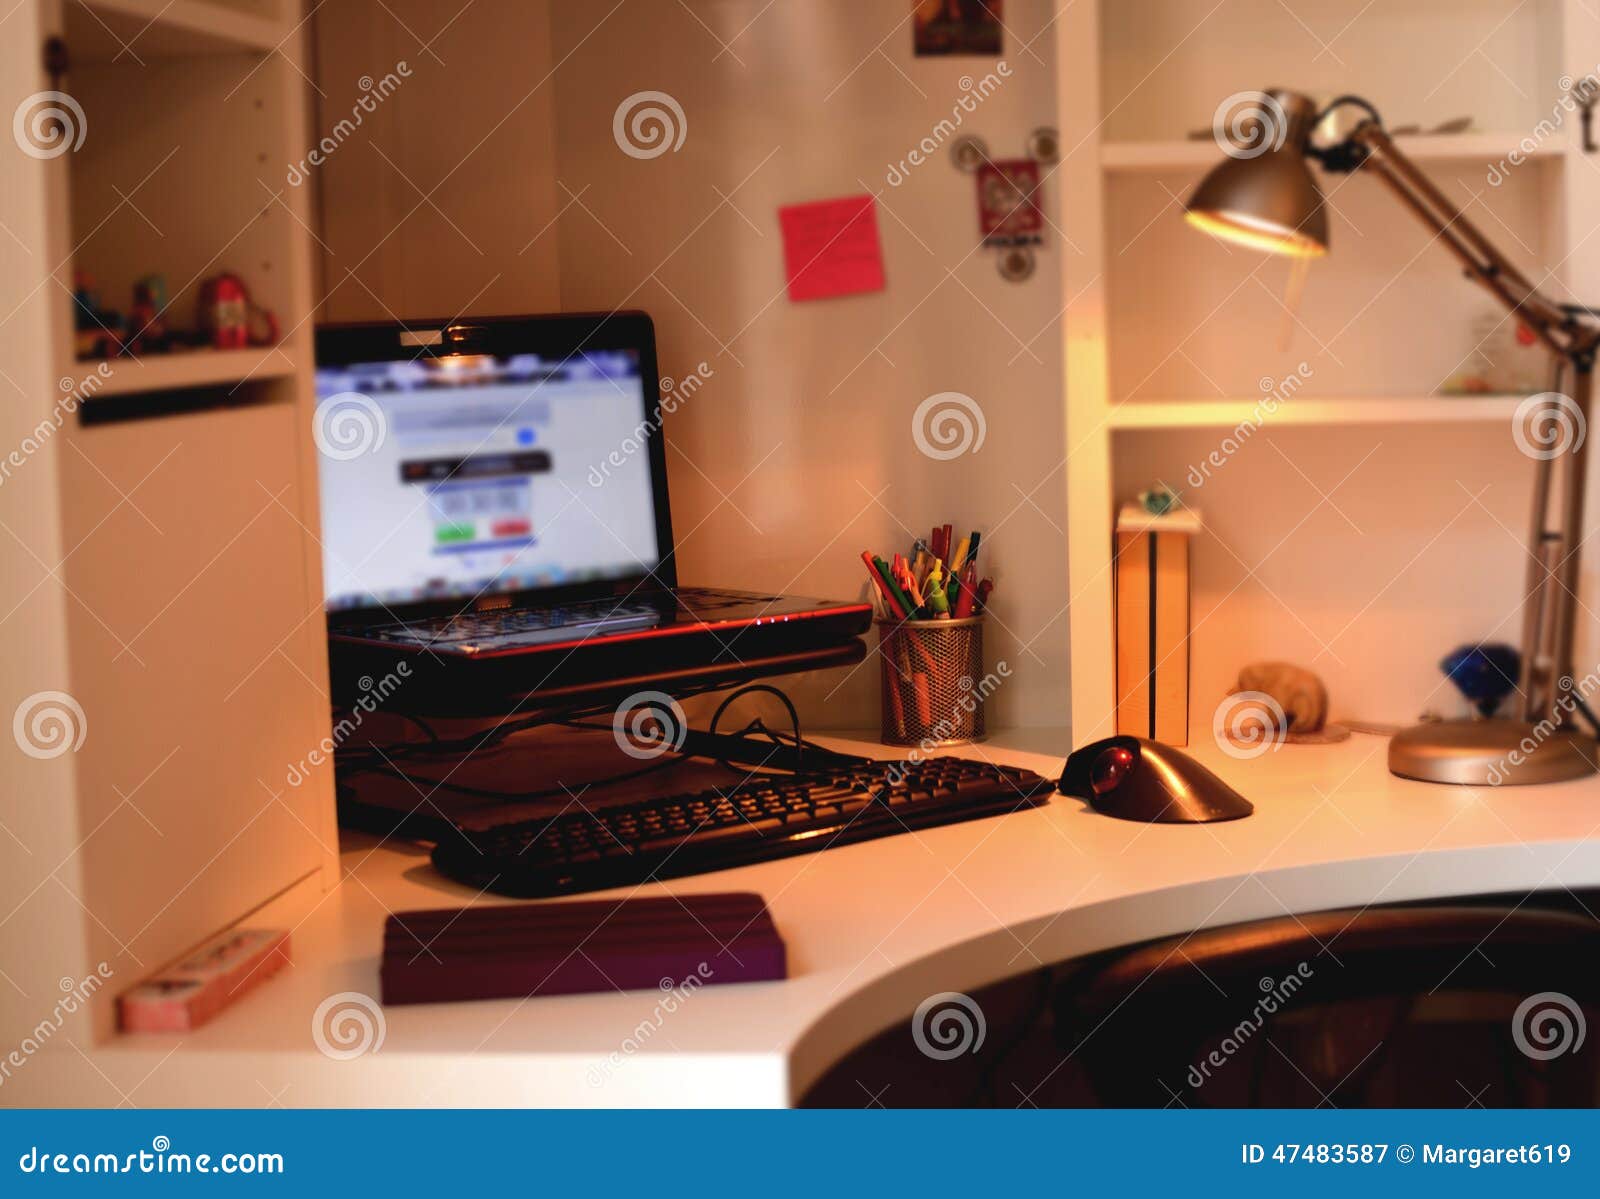 Computer Desk In Kids Room Stock Image Image Of Lamp Mouse